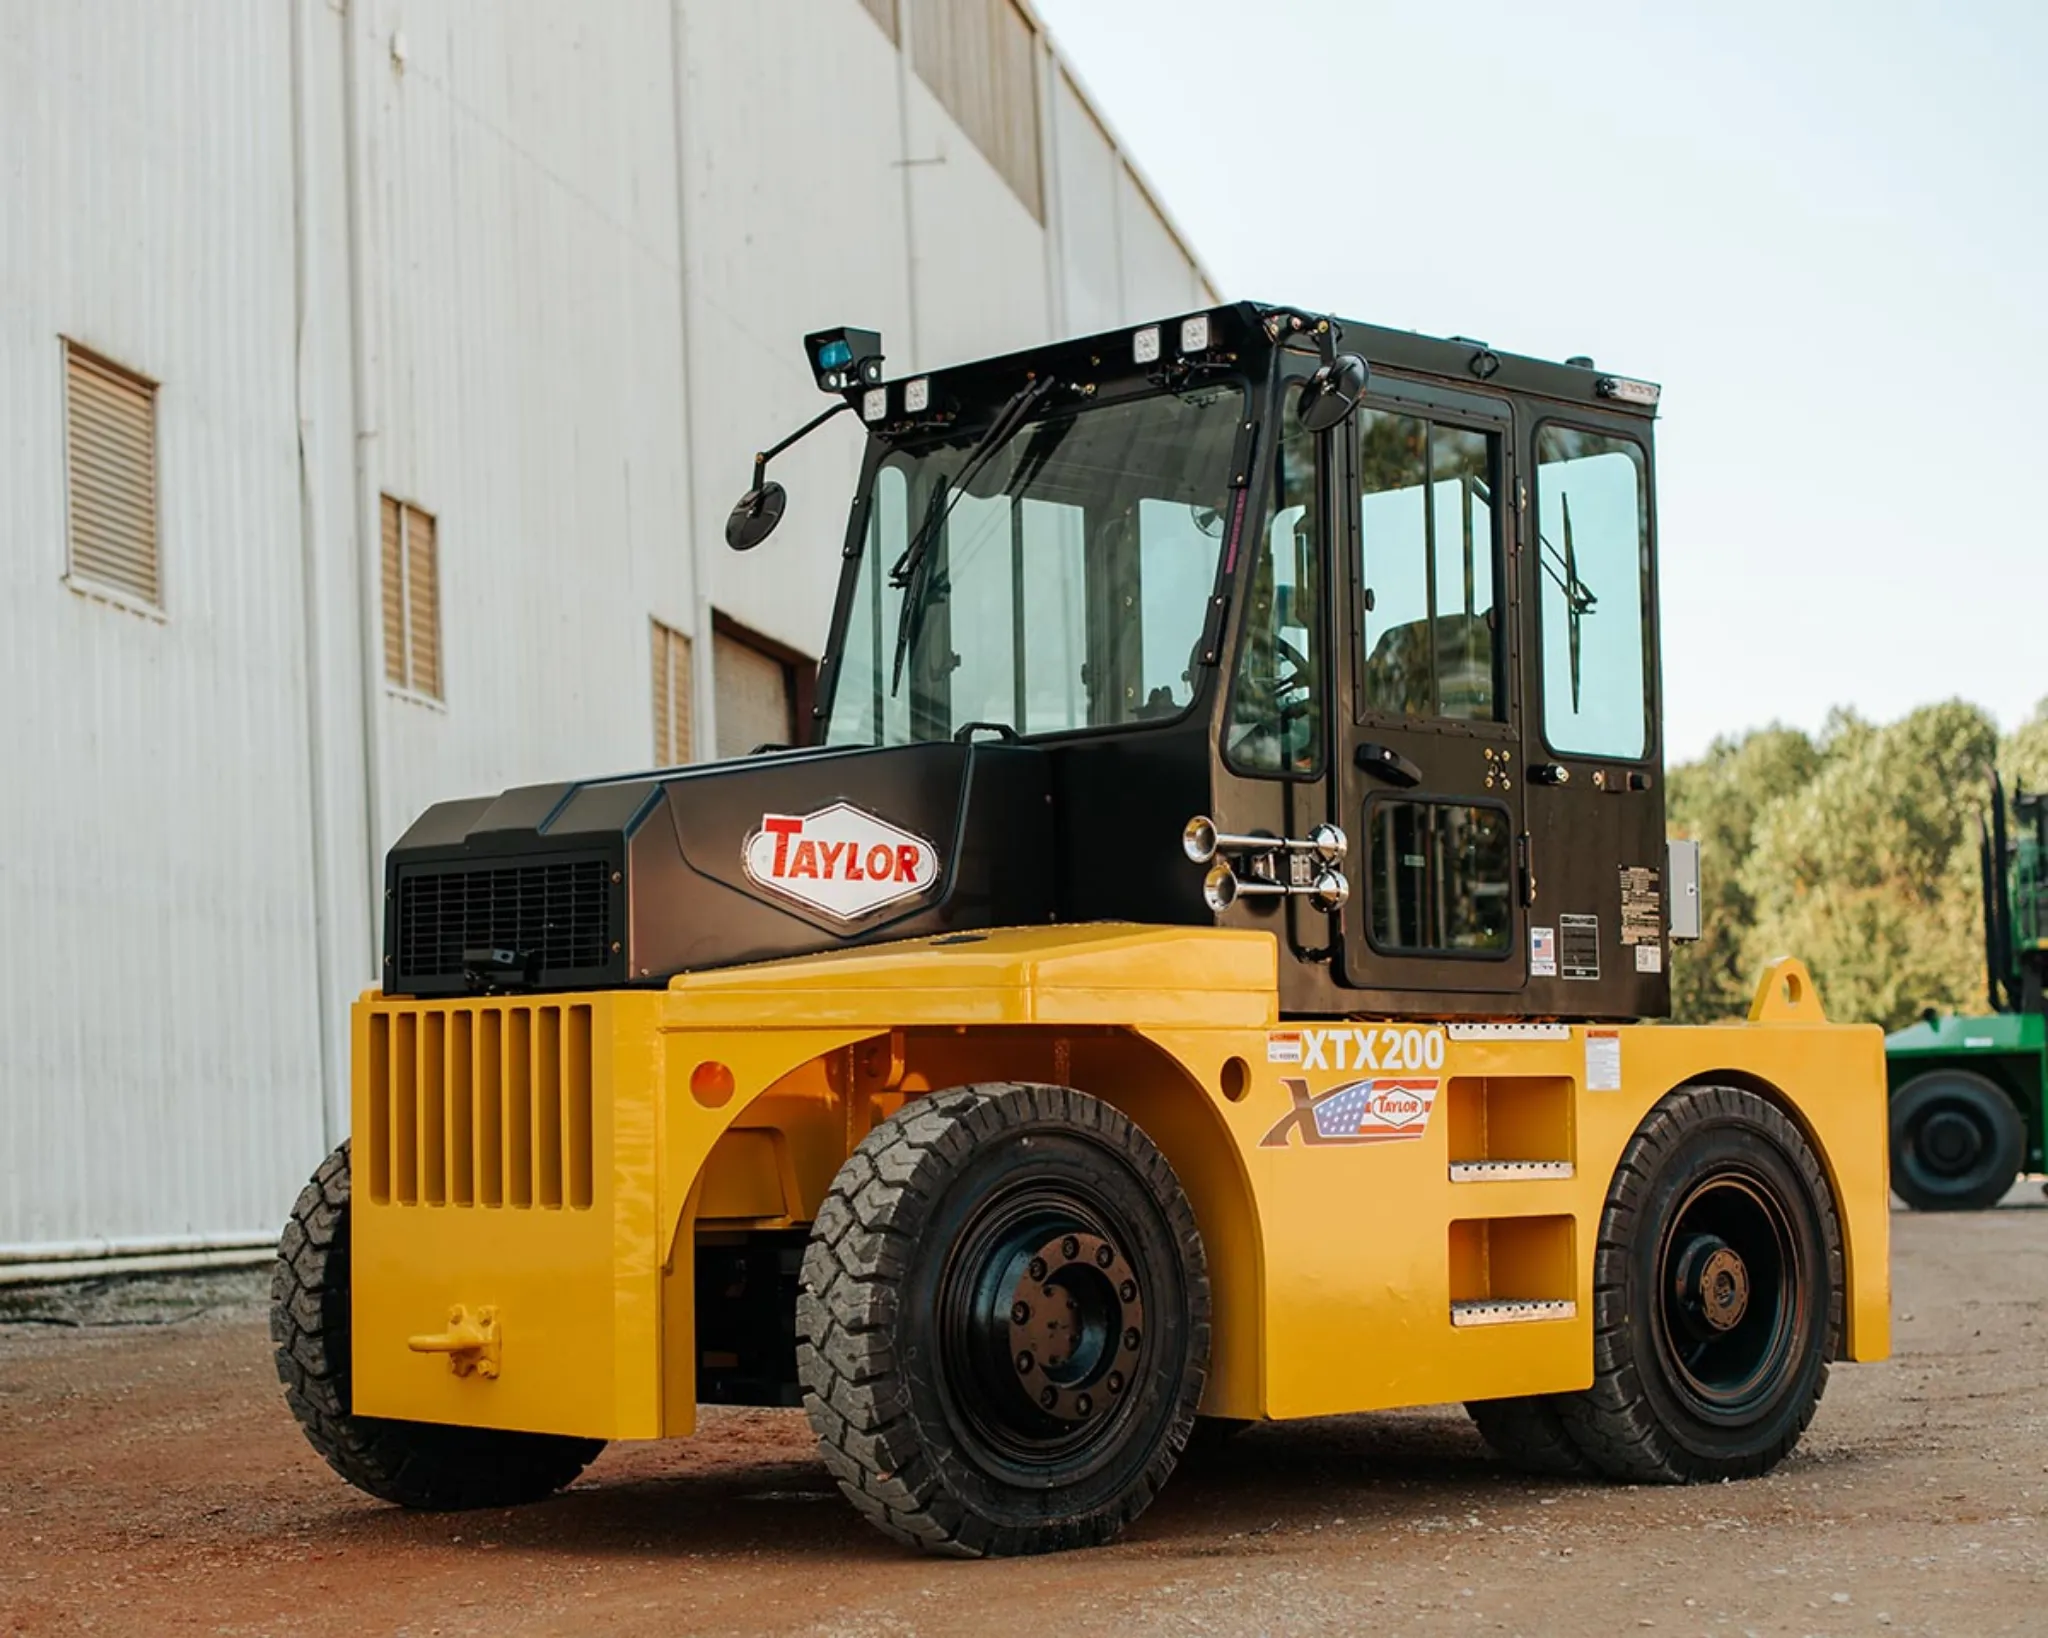 Taylor XTX-200 Tow Tractor